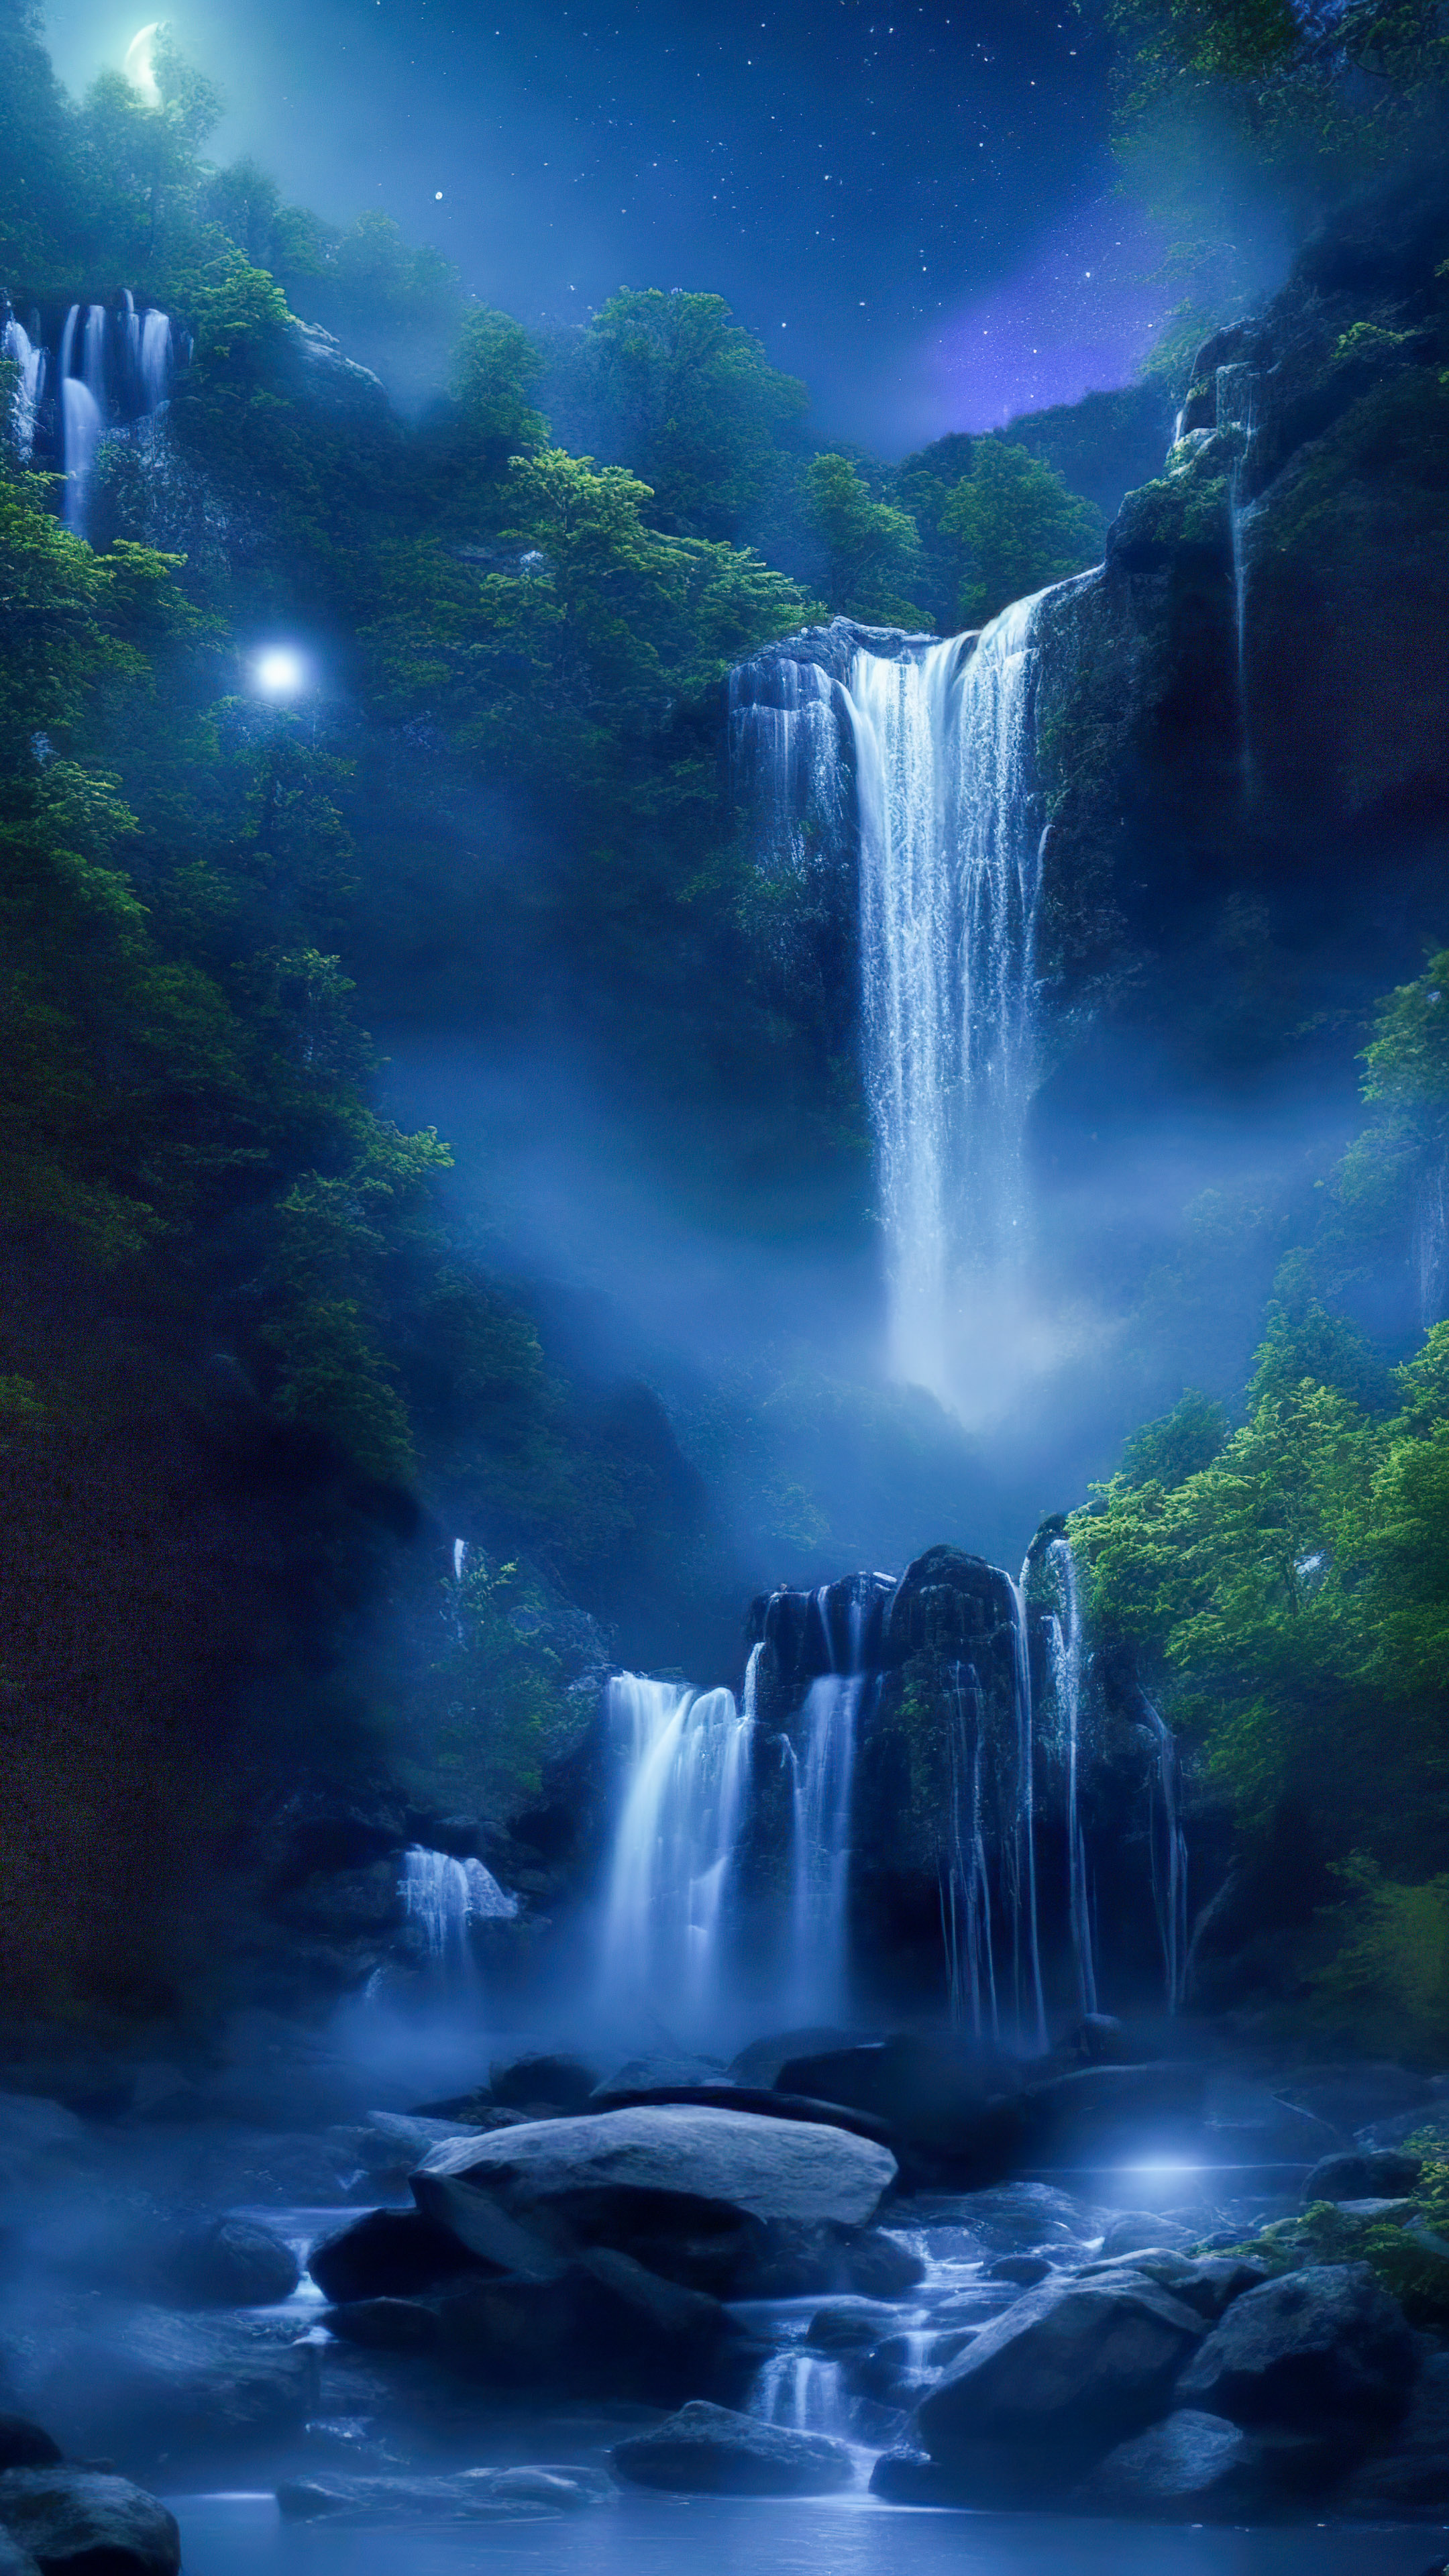 Download the magic of our cool night background, illustrating a magical waterfall illuminated by moonlight, with fireflies dancing around its cascading waters.